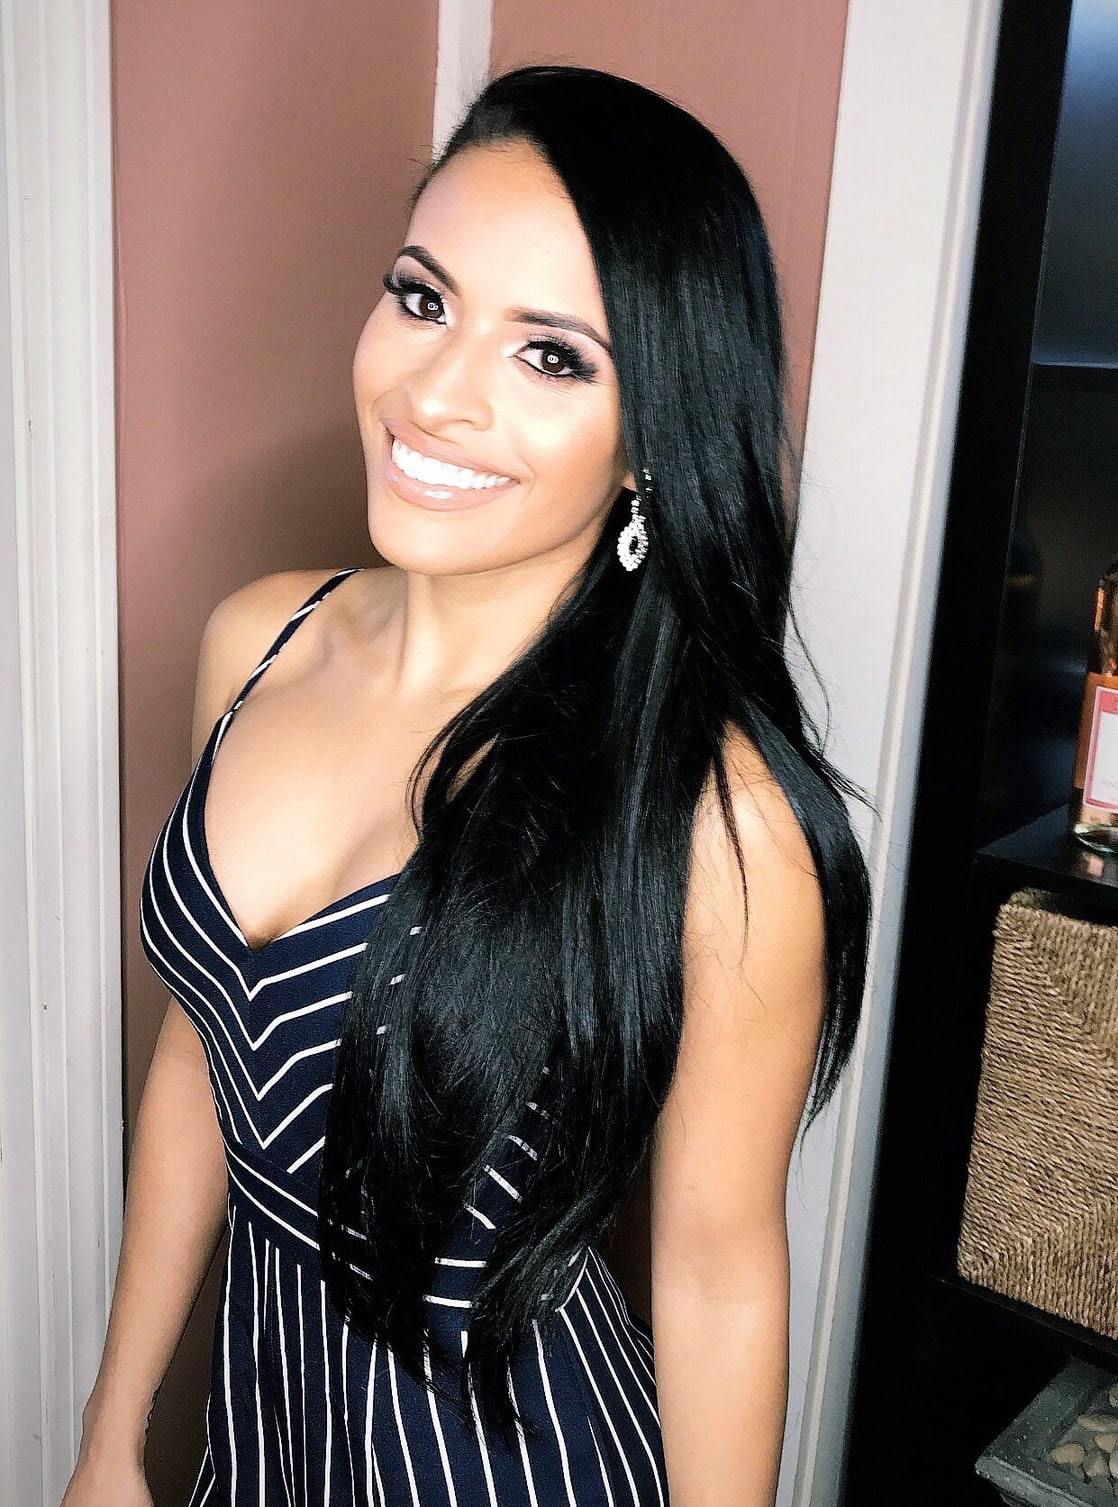 17 Amazing Pictures Of Thea Trinidad Misca Gallery 